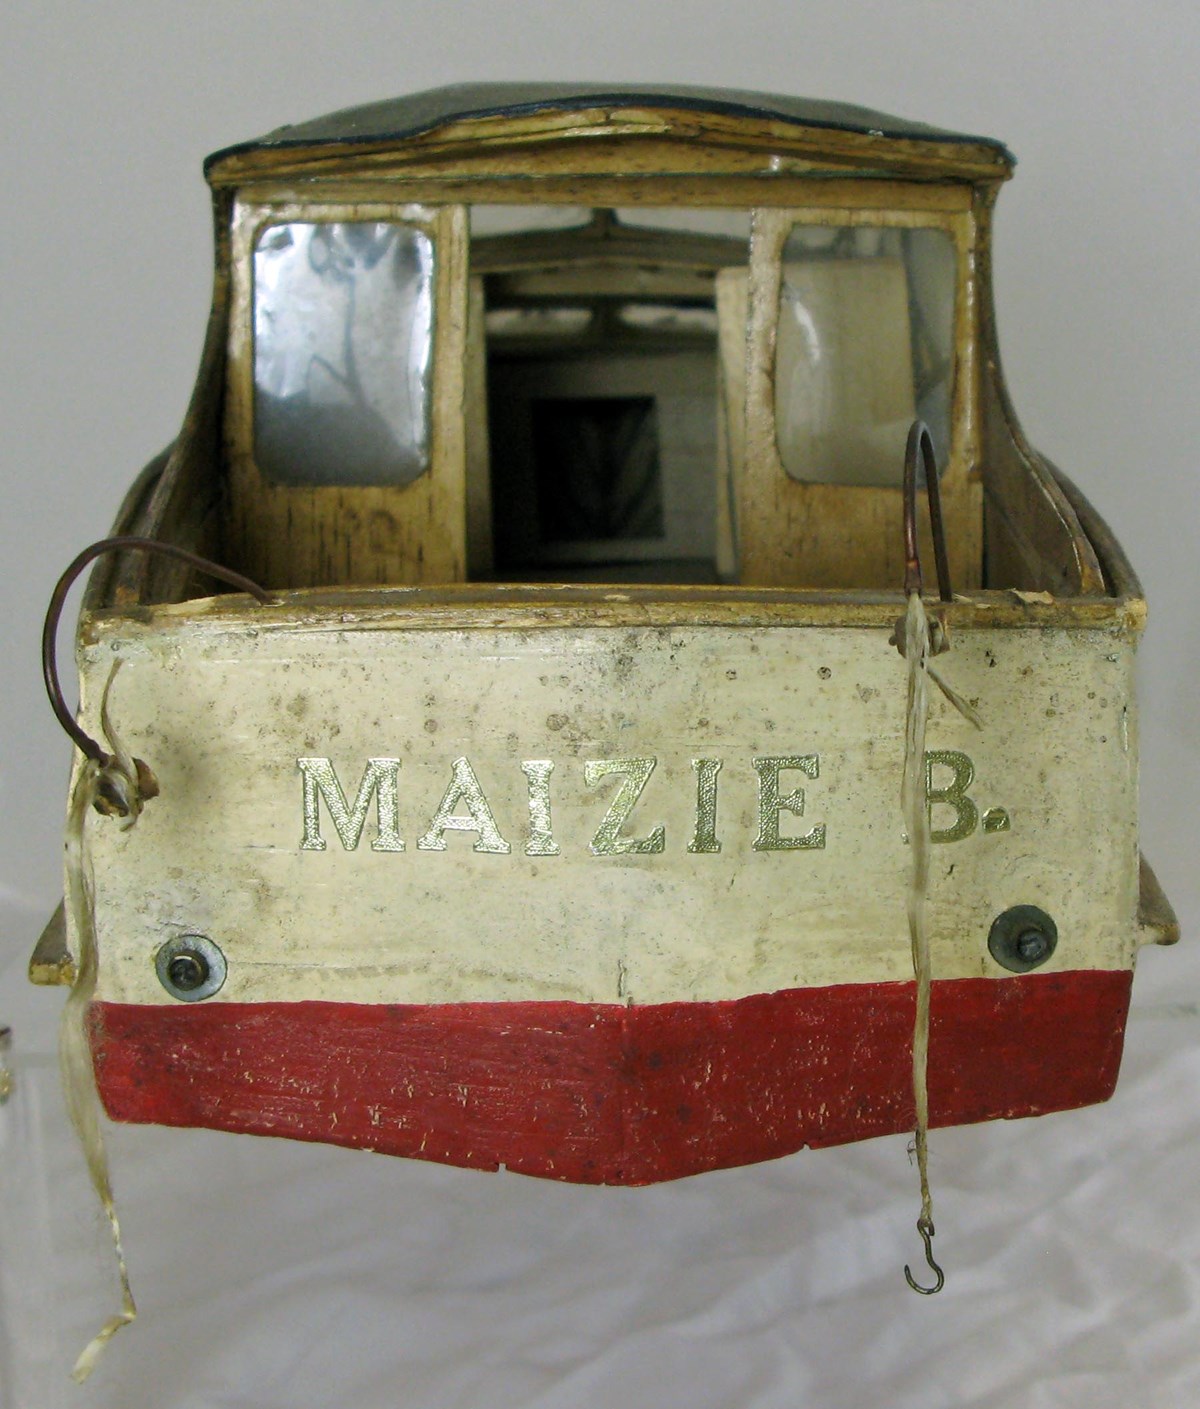 View of wooden model boat from stern